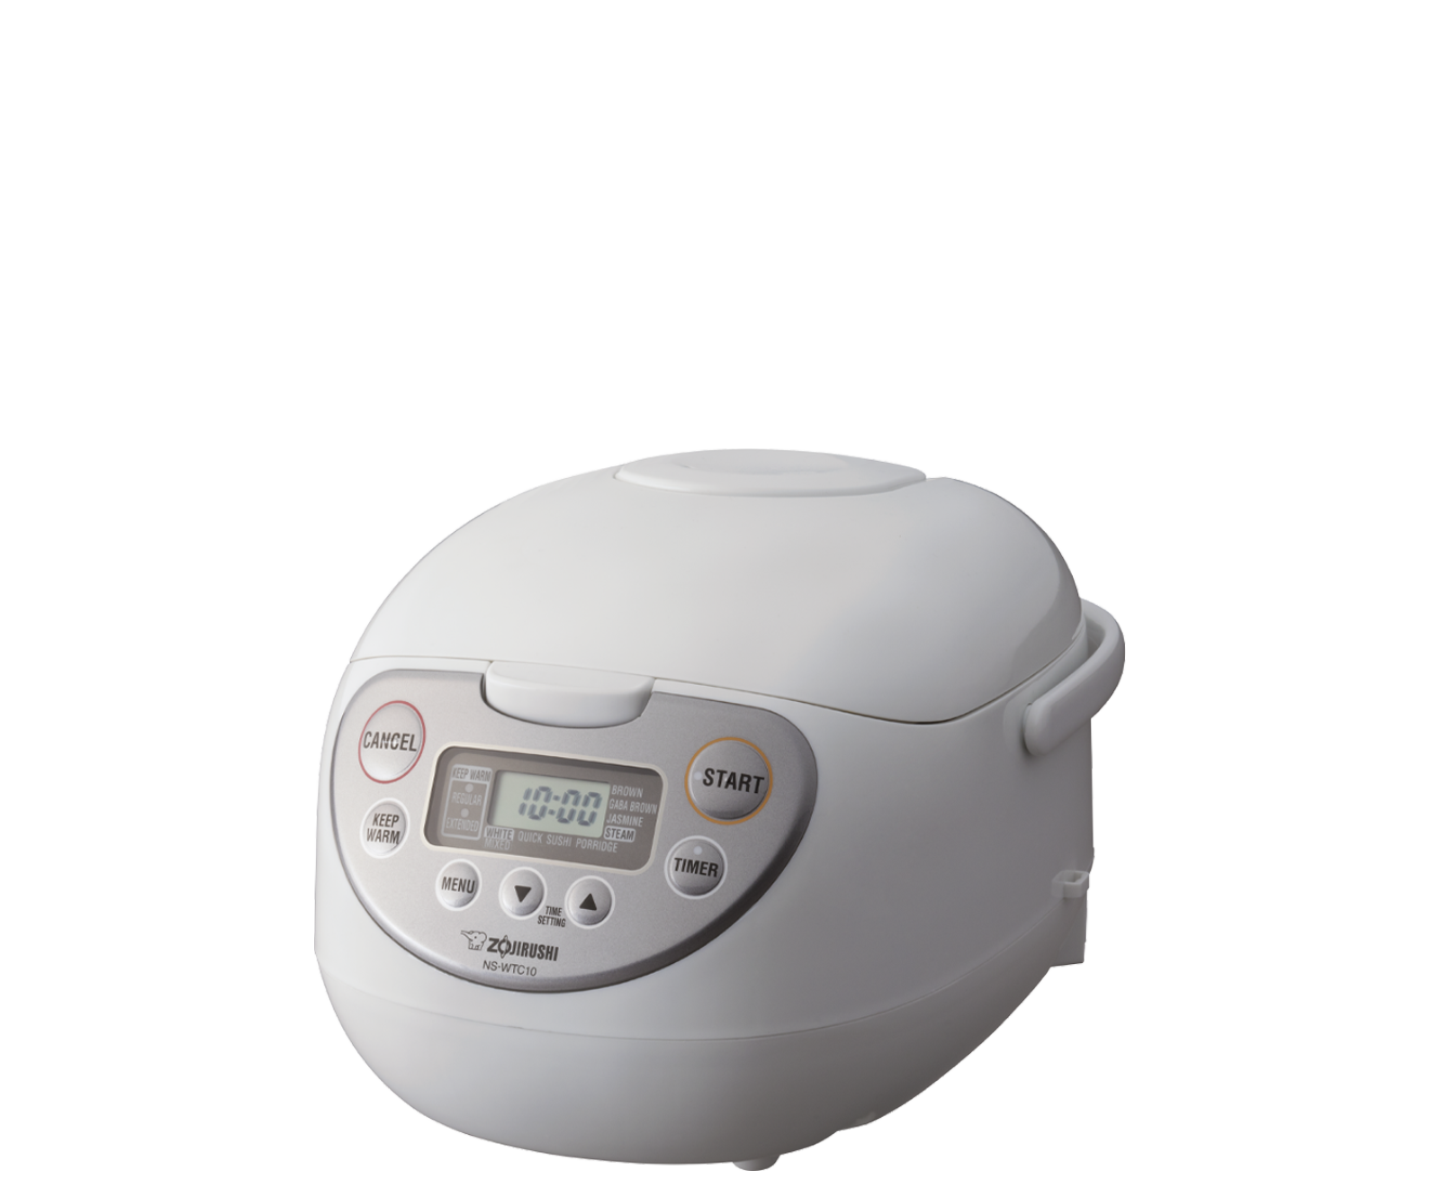 Zojirushi 5.5 Cup Micom Rice Cooker & Warmer Stainless Gray NS